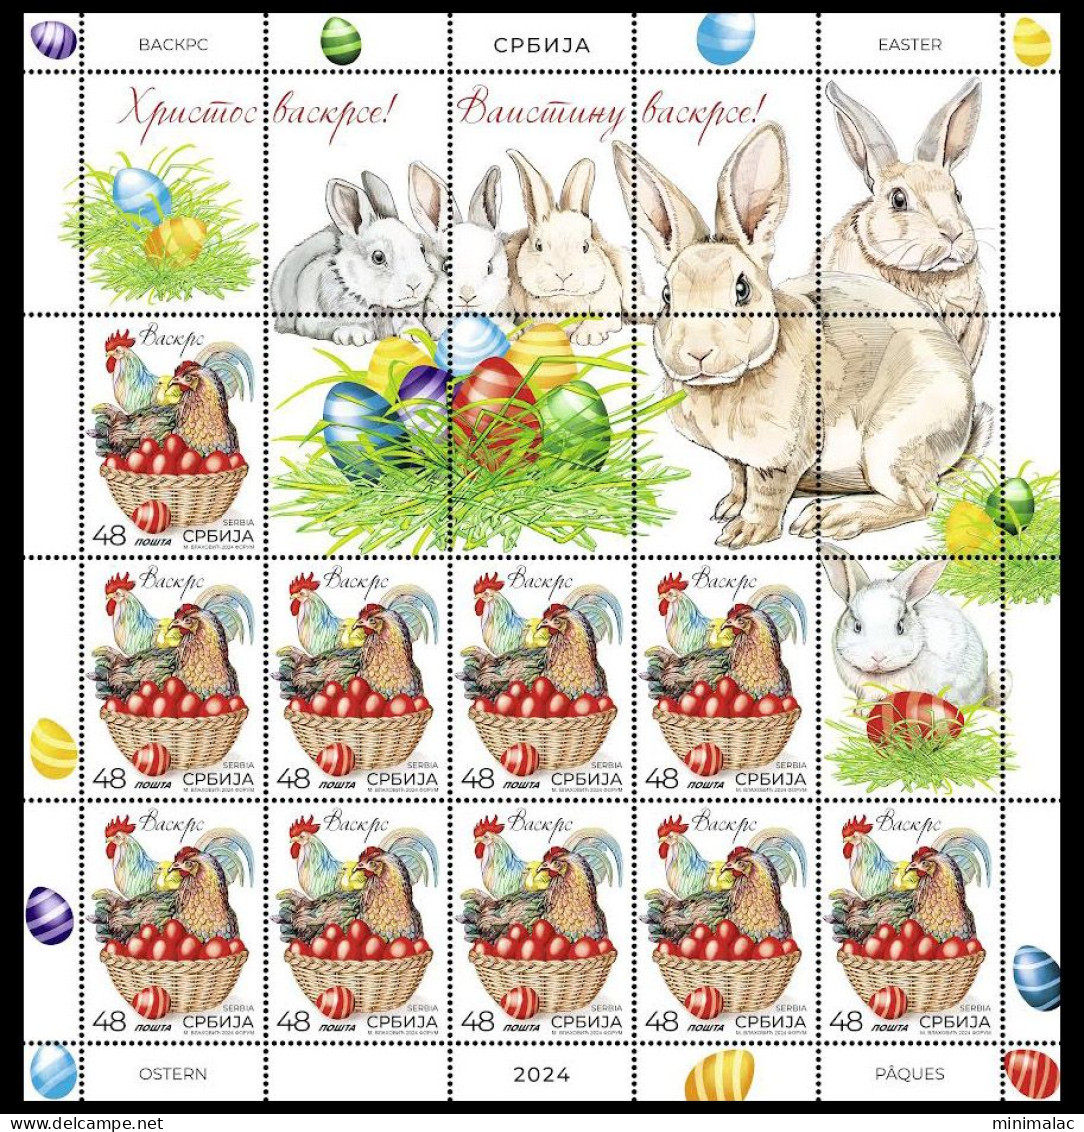 Serbia 2024. Easter, Religions, Christianity, Eggs, Chicken, Rabbit, Sheet, MNH - Serbia